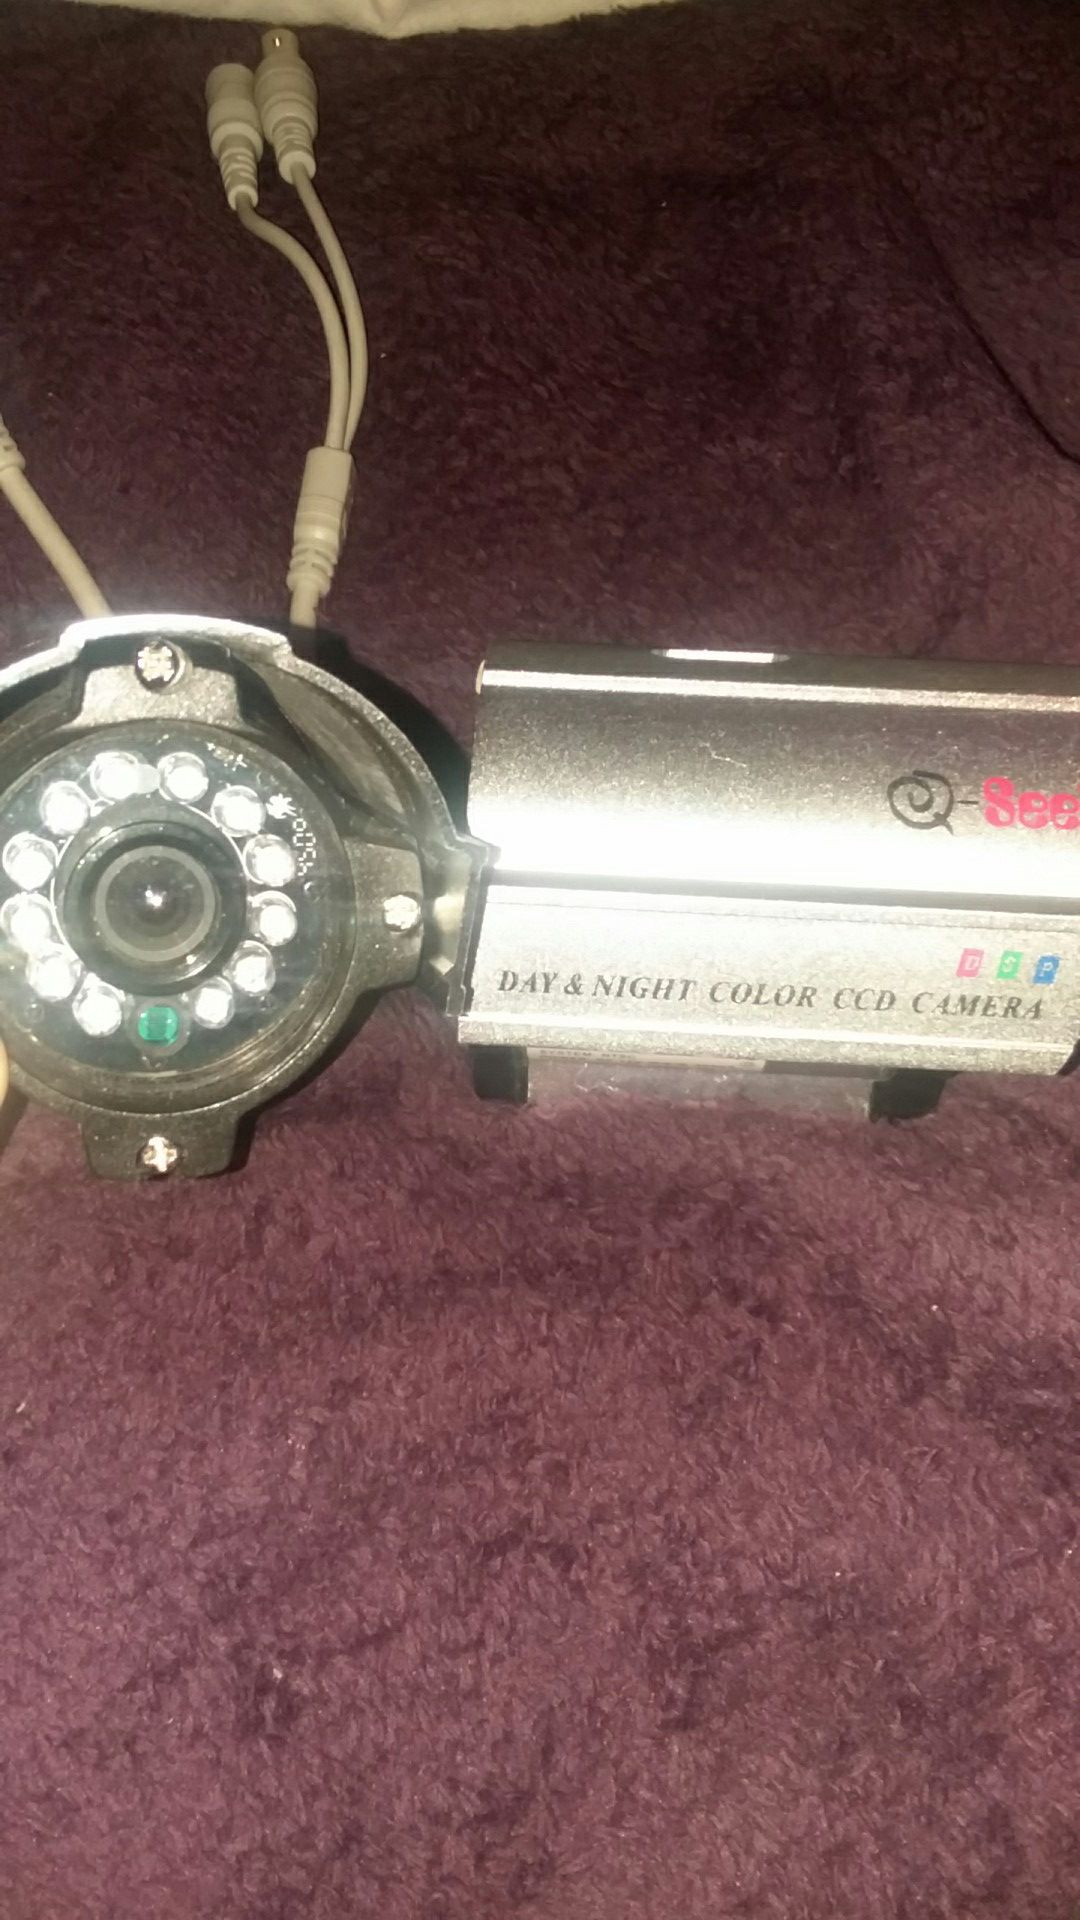 See Day & Night color ccd cameras